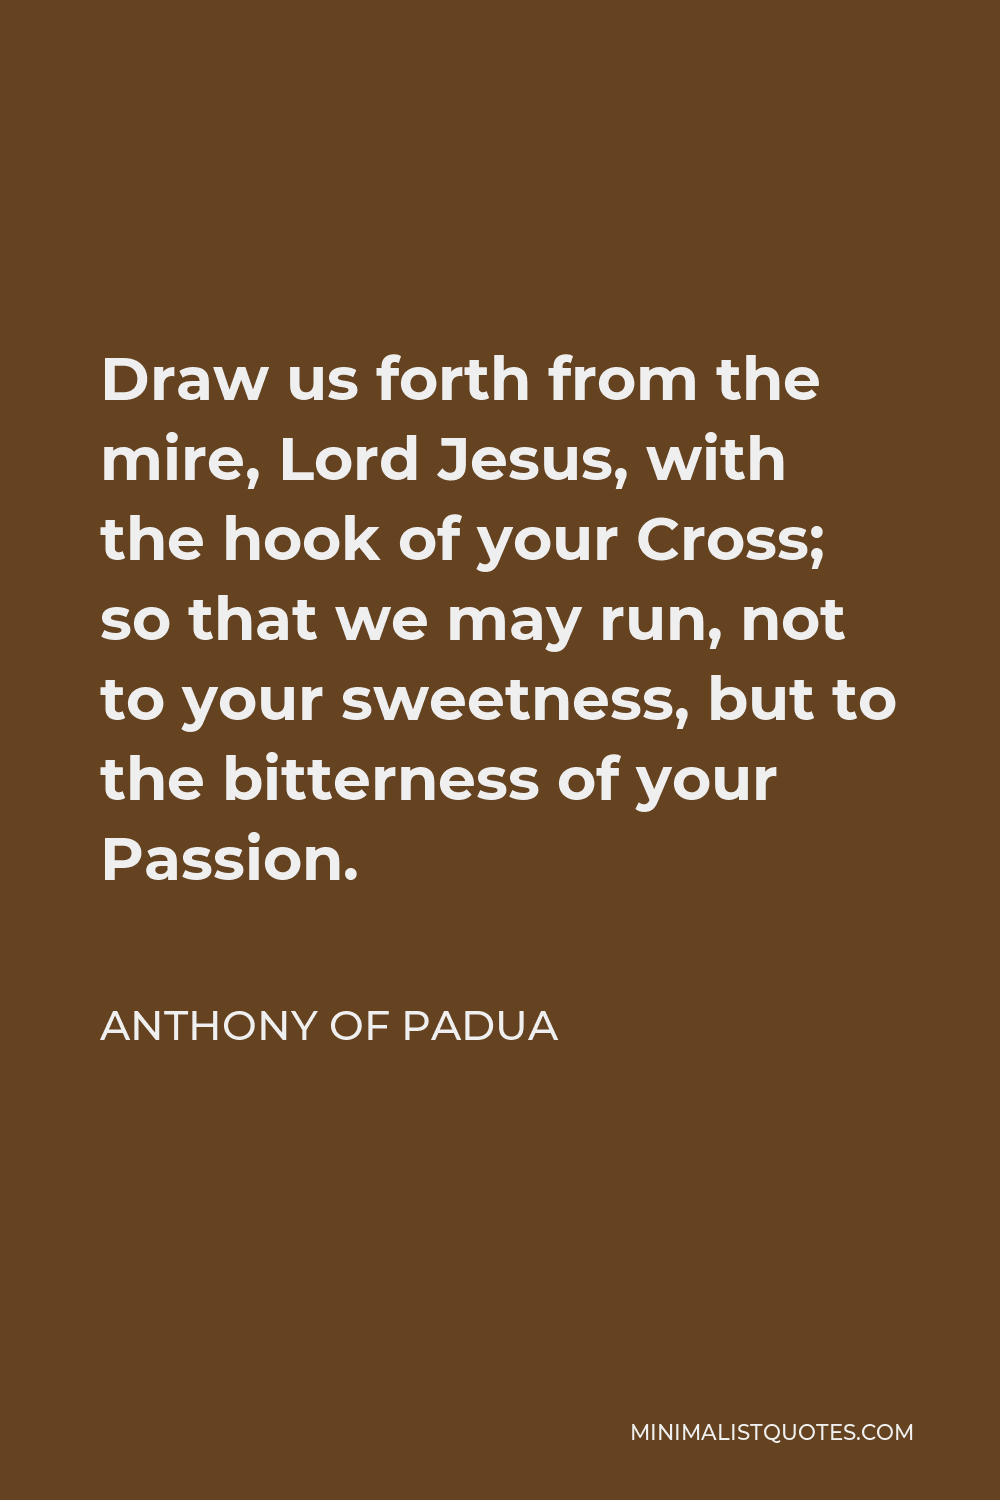 Anthony of Padua Quote - Draw us forth from the mire, Lord Jesus, with the hook of your Cross; so that we may run, not to your sweetness, but to the bitterness of your Passion.